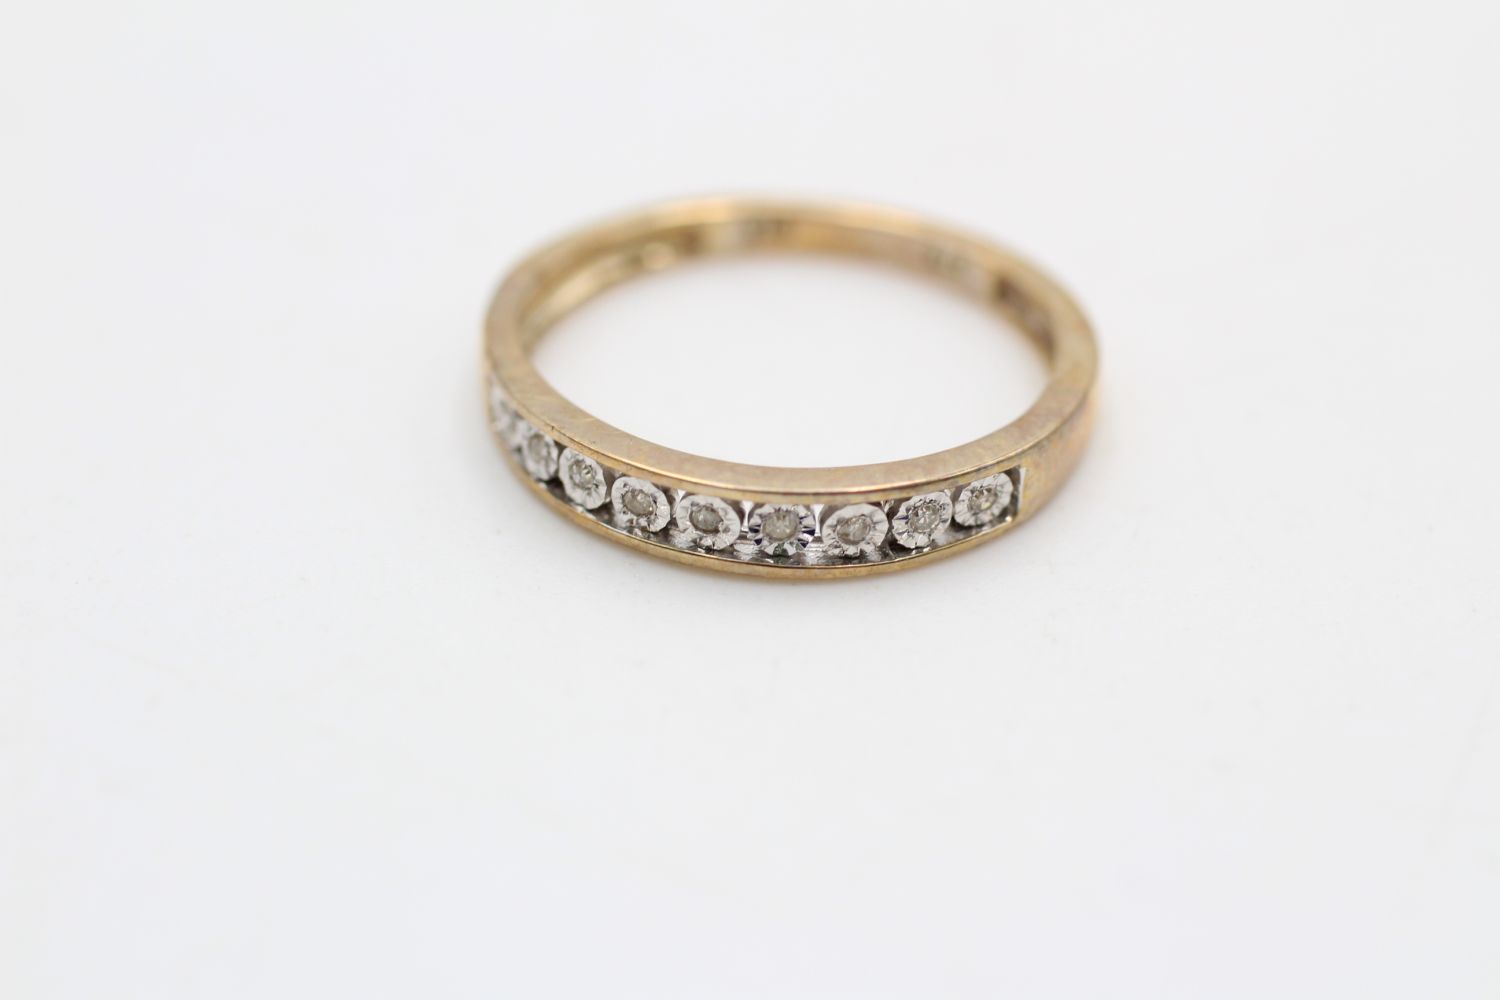 9ct gold vintage diamond nine stone channel setting ring (1.4g) - Image 2 of 4